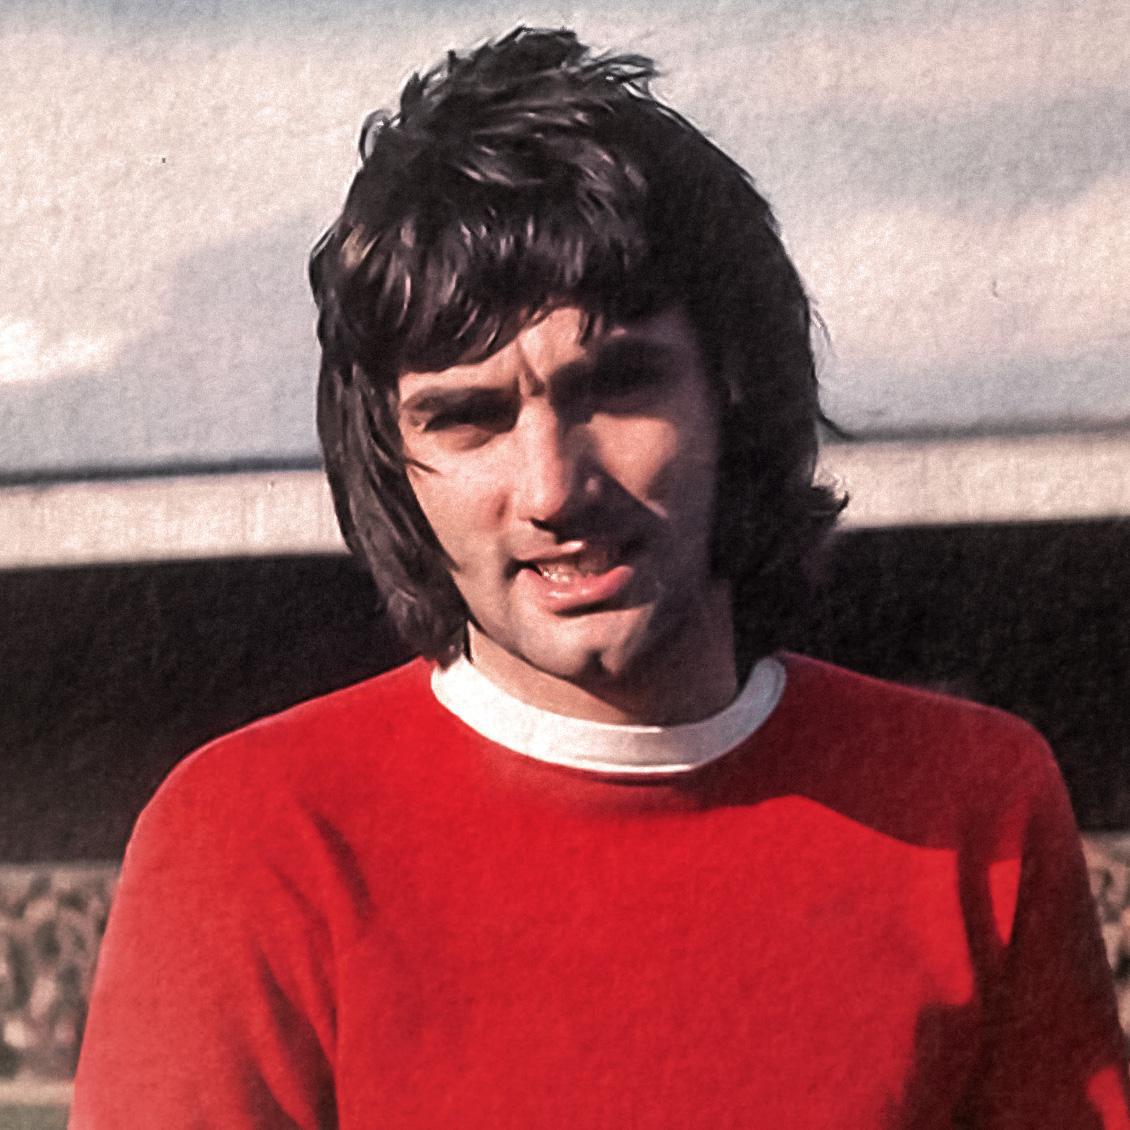 Manchester United's Top 10 Goal Scorers of all time - George Best